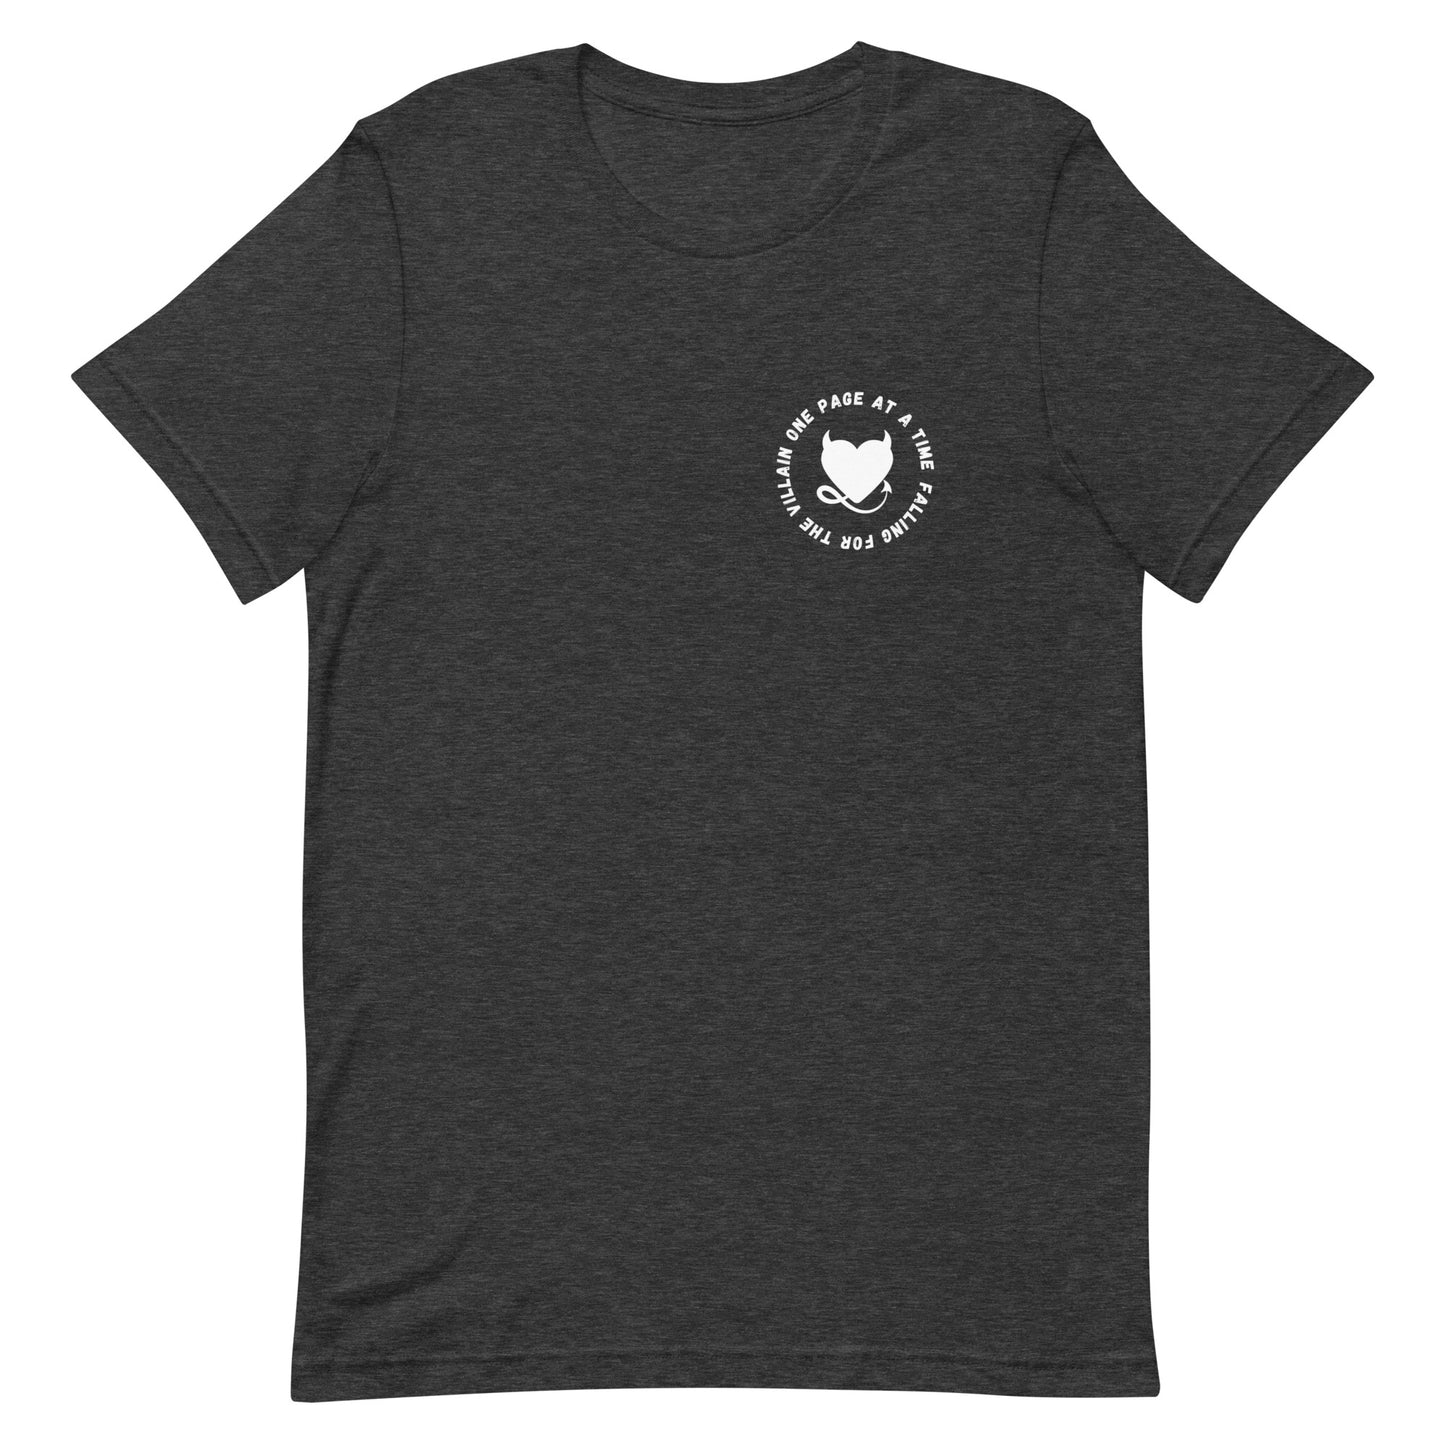 falling for the villain one page at a time t-shirt